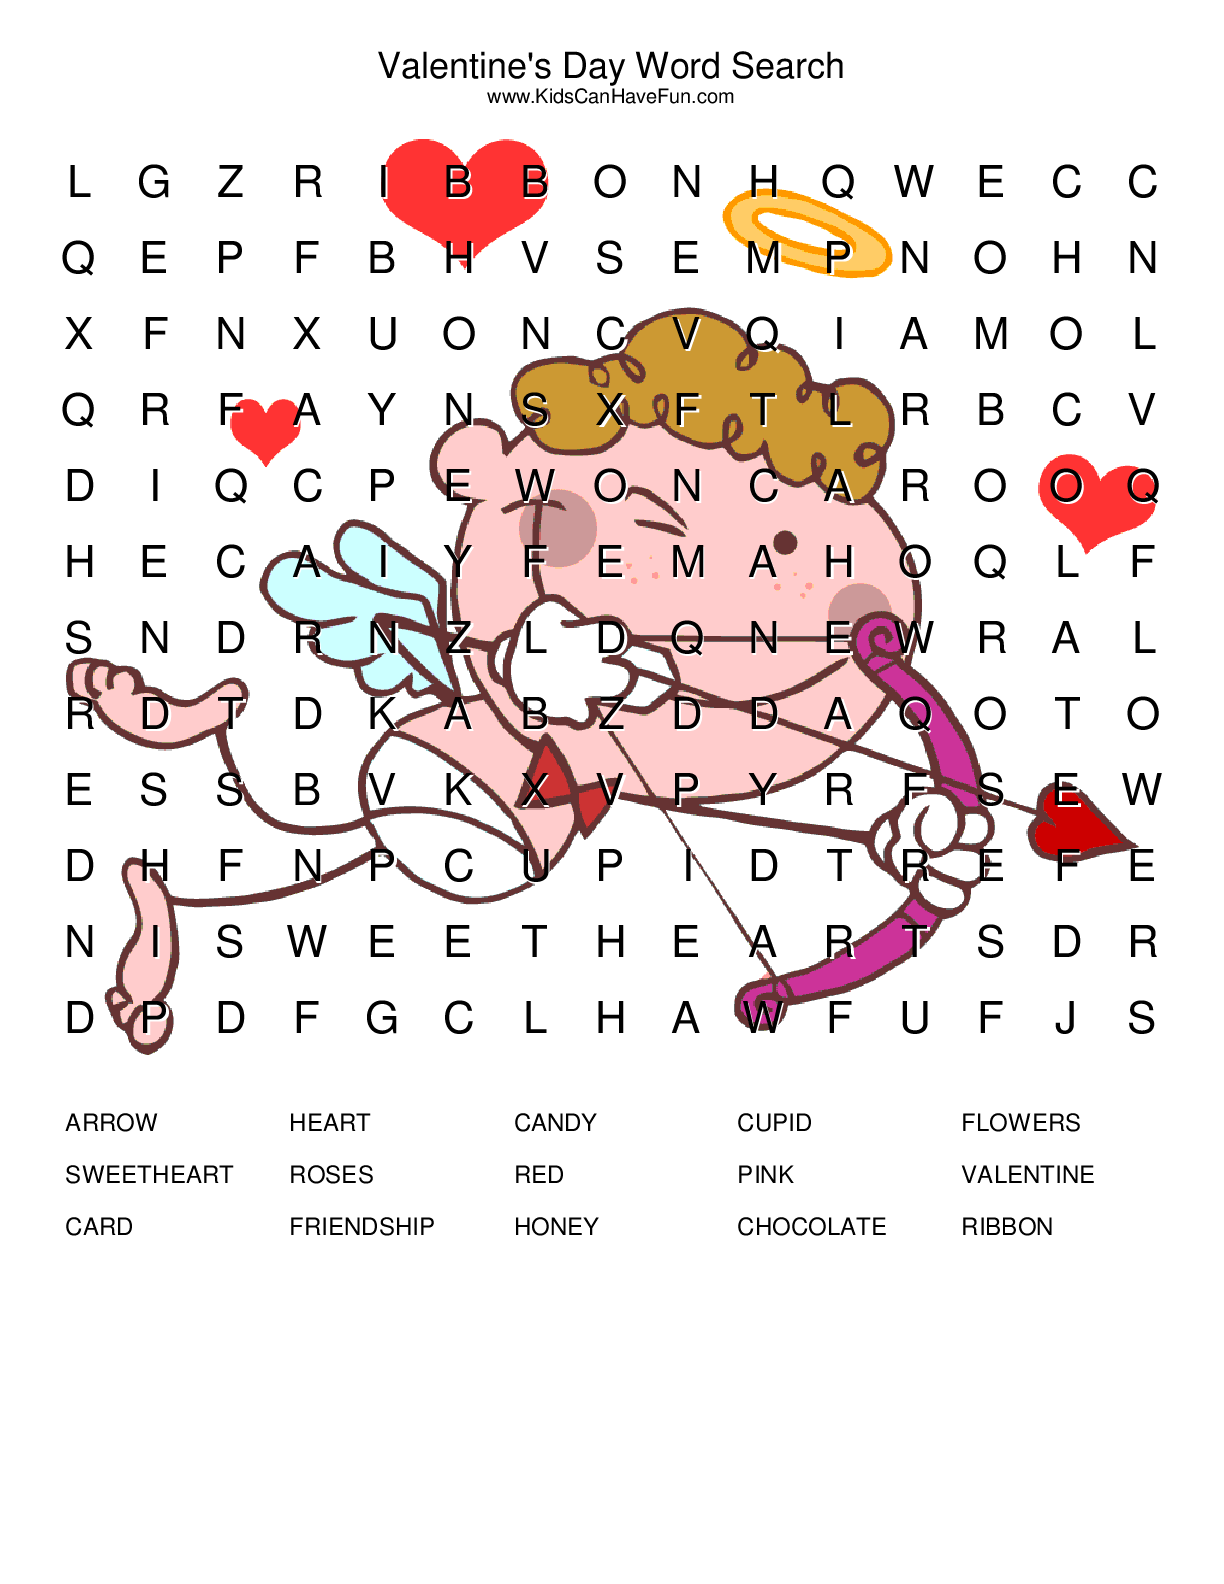 List Valentine's Day Words For Word Search, Cross Word, Word Jumble